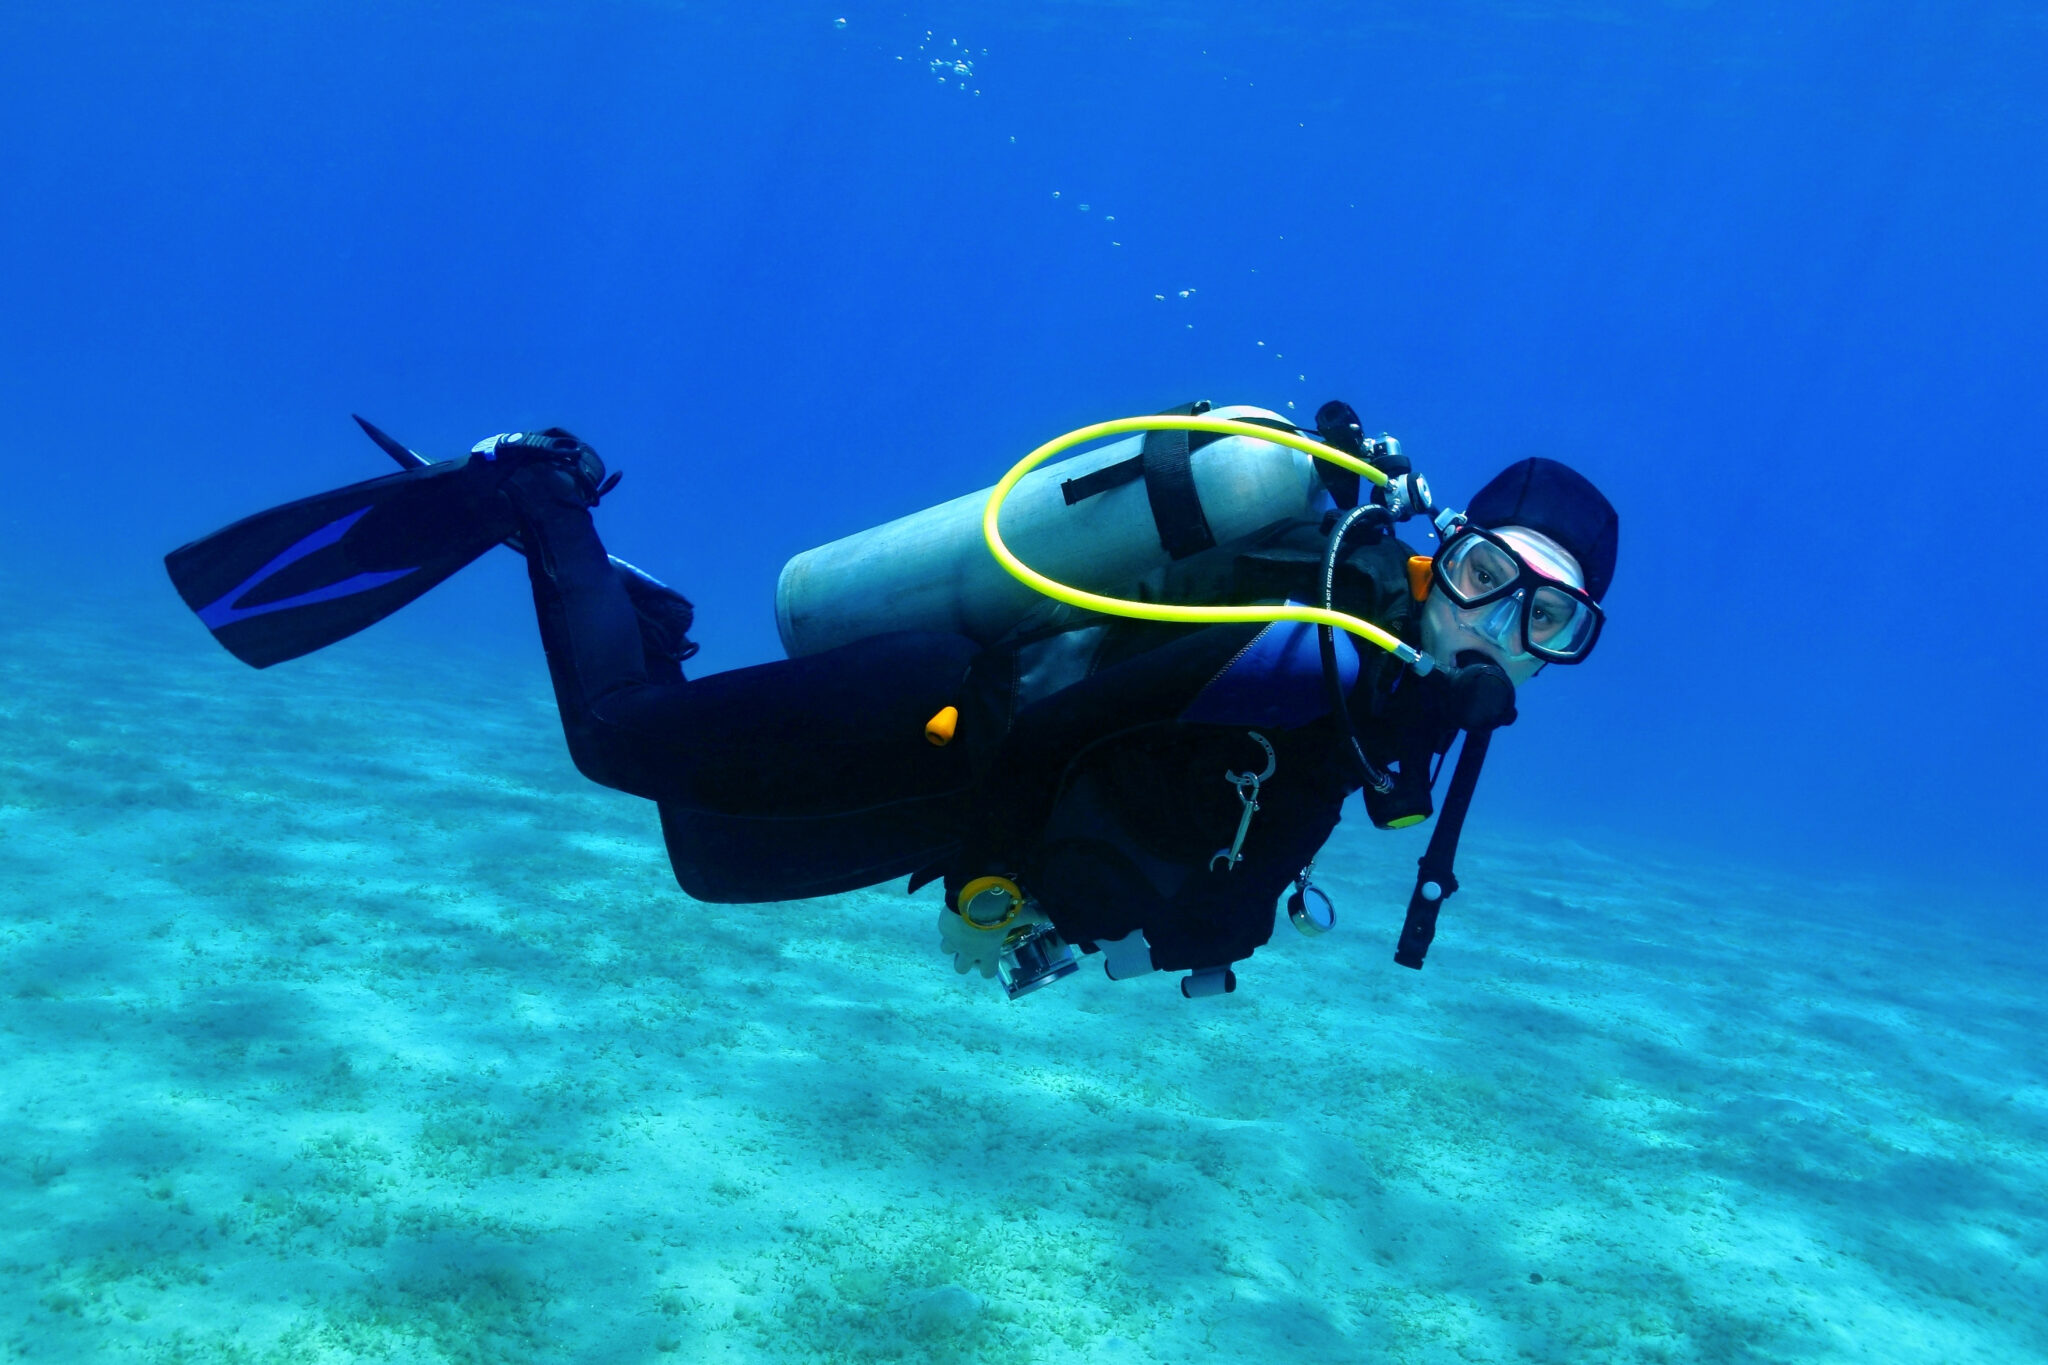 a scuba diver underwater looking directly at the camera